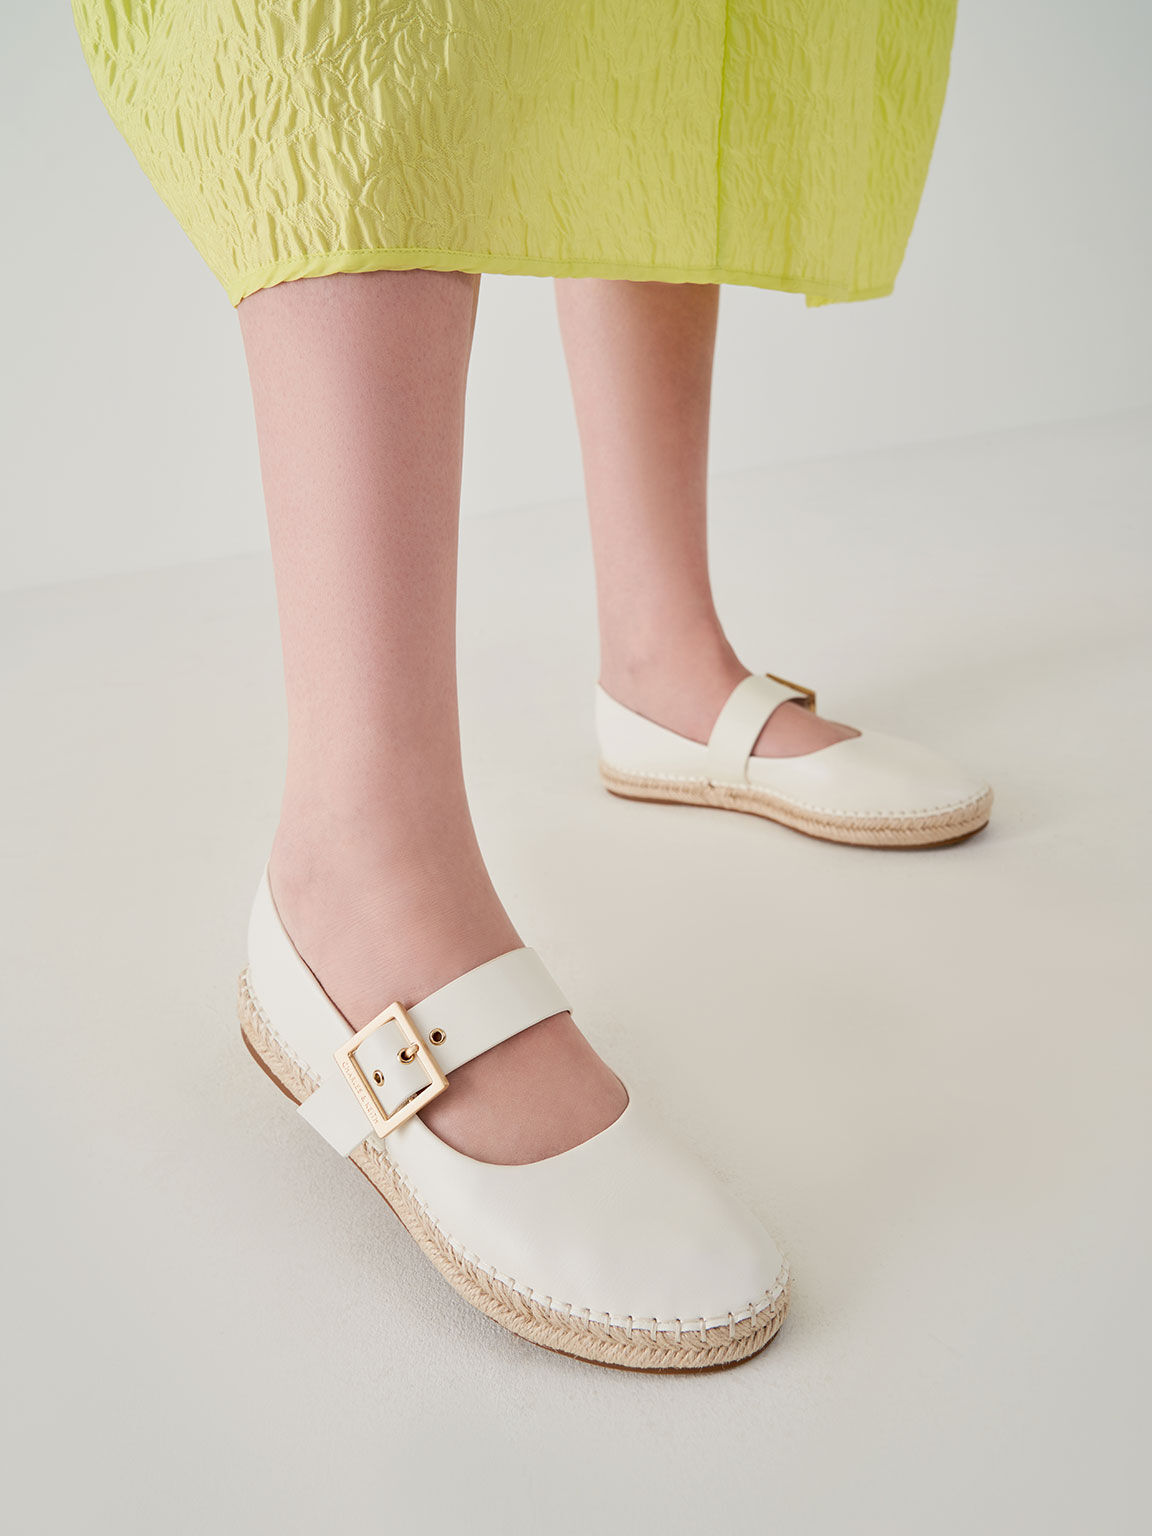 Buckled Espadrille Flats - White